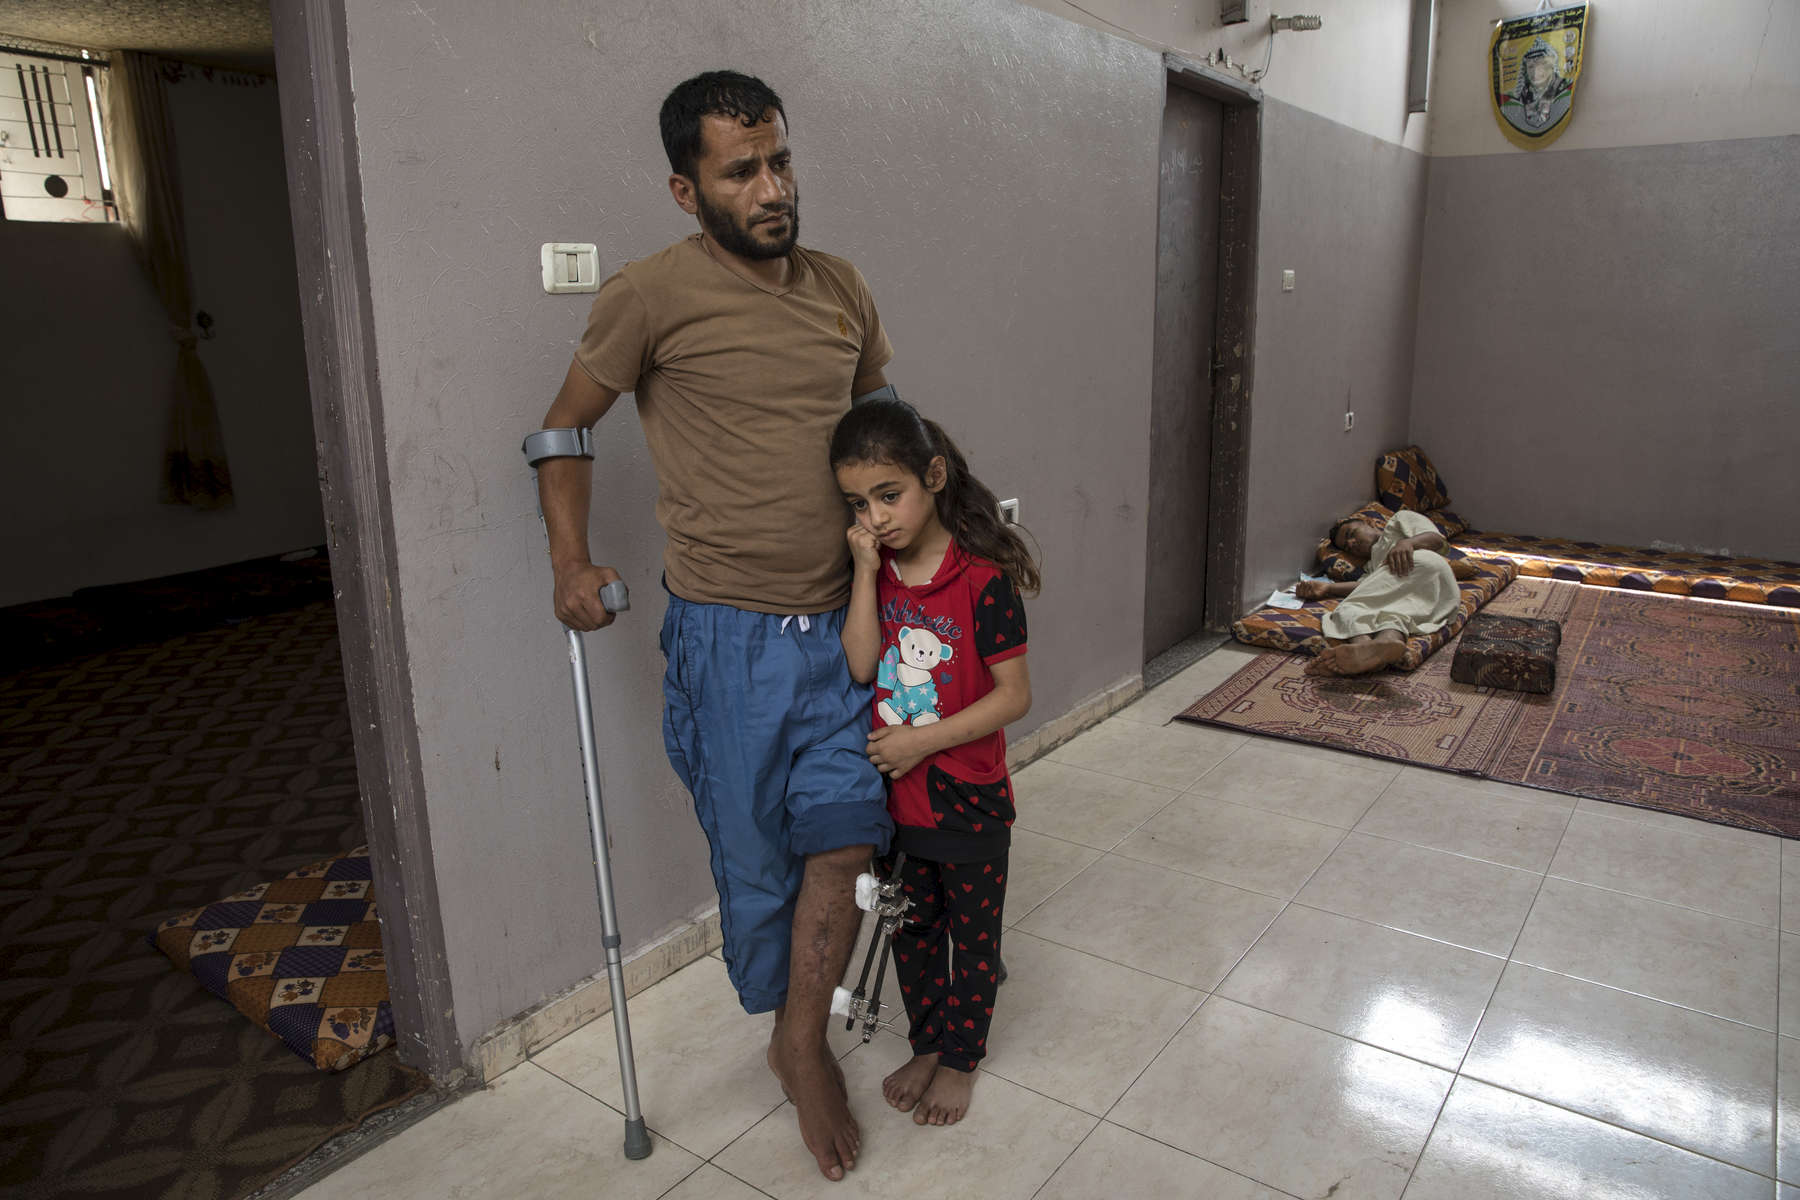 GAZA CITY, GAZA STRIP- MAY 22,2018 : Ahmad Abu Jaser, 31, father of four daughters, hugs his daughter Lyan, age 7, he sustained an injury in his leg along with his brother who was shot twice, in his thigh and back resting on the floor on May 22,2018 in Gaza city, Gaza strip.At least 110 Palestinians were killed during the between March 30-May 15th. According to the International Committee of the Red Cross (ICRC), 13,000 Palestinians were wounded (as of June 19, 2018), the majority severely, with some 1,400 struck by three to five bullets. No Israelis were physically harmed during this time period, Israel's use of deadly force was condemned during the UN general assembly on June 13 th along with other human rights organizations.Everyone is well aware that Gaza's two million inhabitants are trapped in a cycle of violence and poverty, created by policies and political decisions on both sides. The problems and complications affecting Gaza today are overwhelming. The world, seemingly accustomed to the suffering of the Gazan people turns a blind eye. (Photo by Paula Bronstein ) 